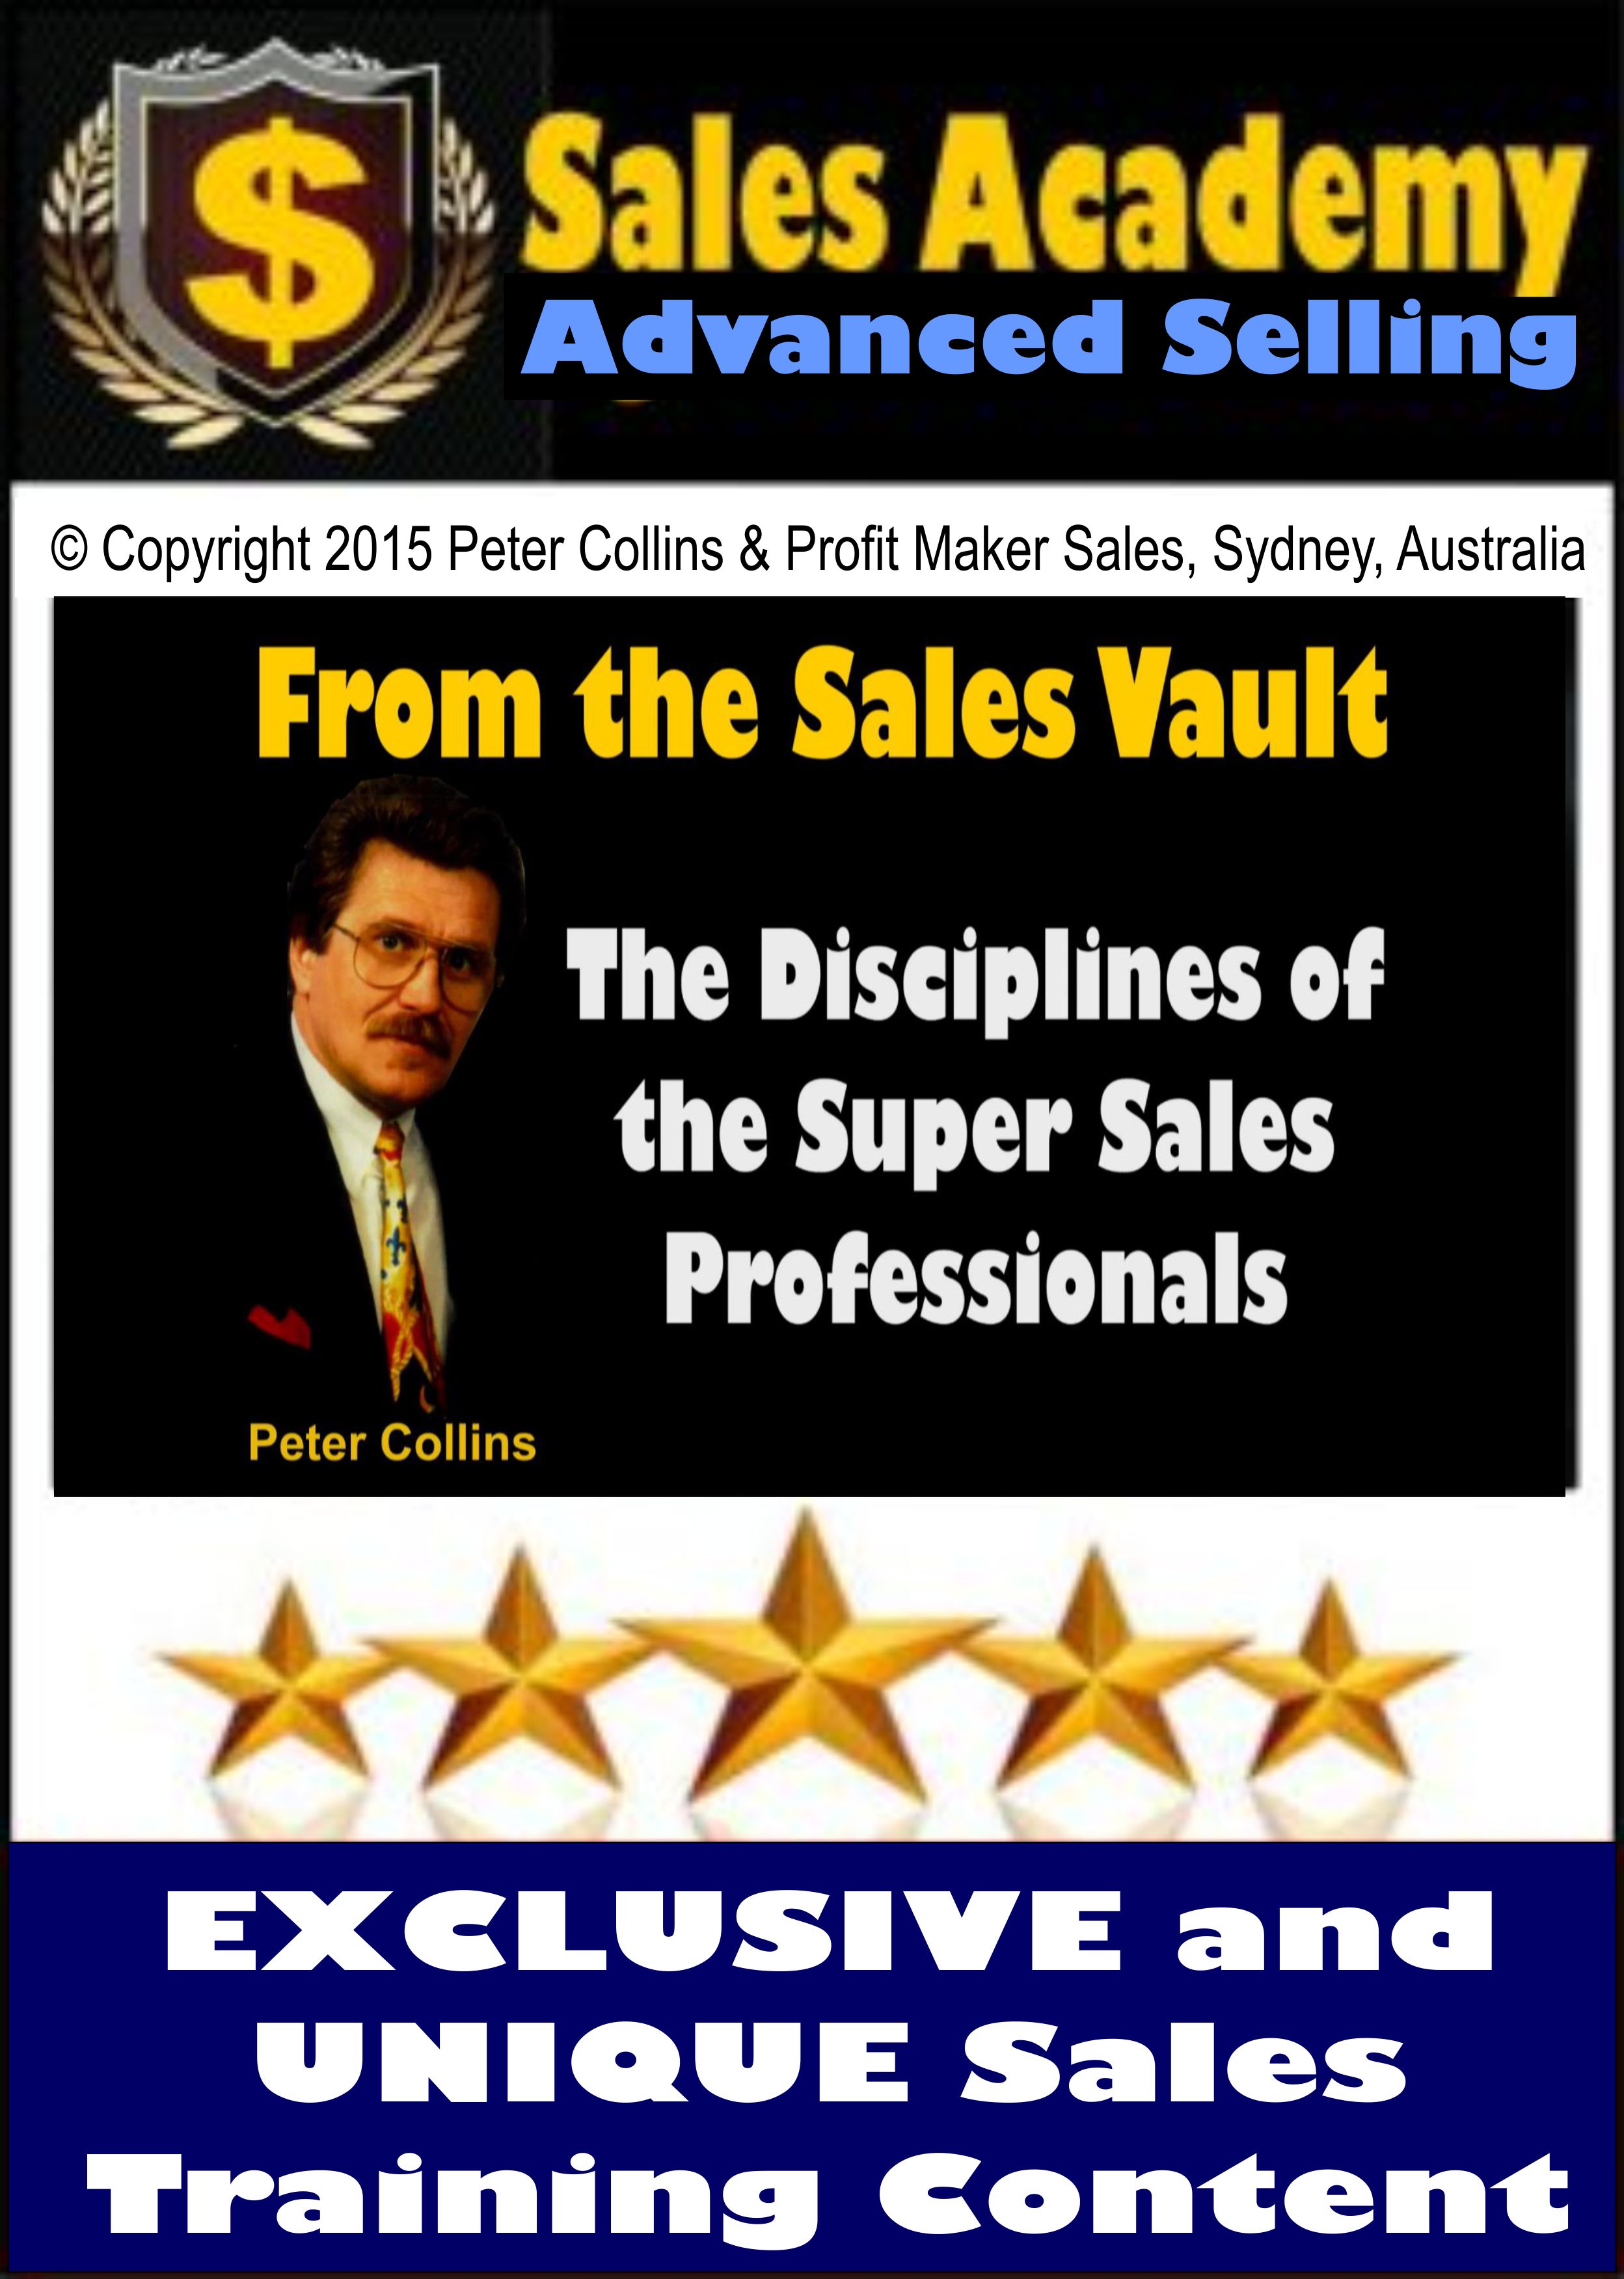 From the Sales Vault – The Disciplines of the Super Sales Professionals – 10 Videos – Total 2 Hours 25 Minutes